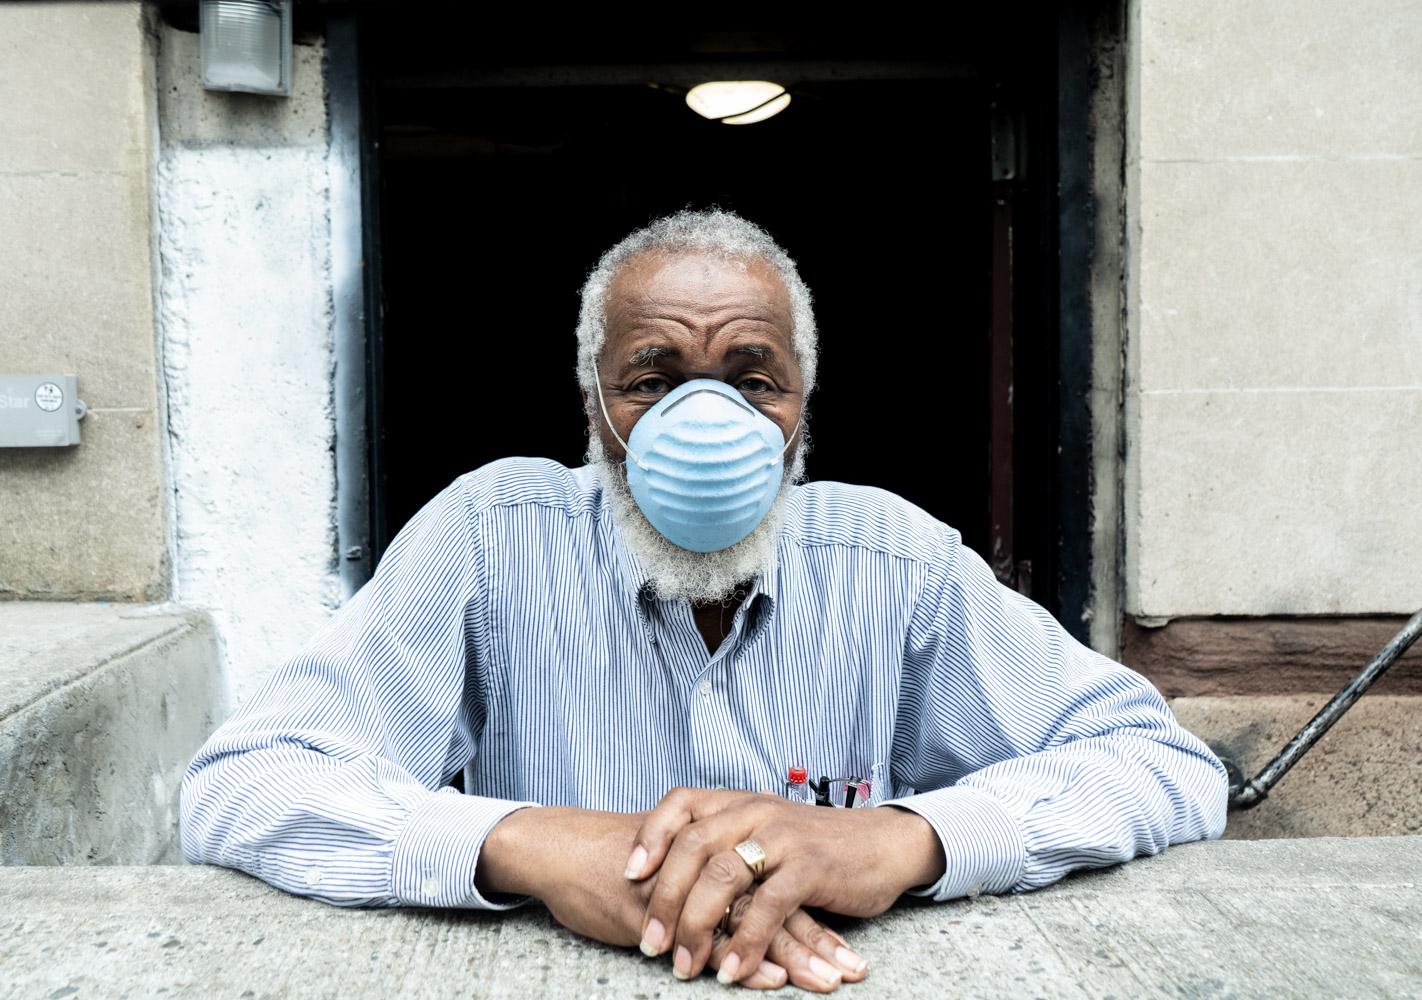 May 28, 2020: Ronald, a 67-year-old building contractor, takes a break on Fulton Street at Arlington Place in Brooklyn, New York. When asked about the pandemic, he tells me, “Things are better, there is nothing to be afraid of.” © Camilo José Vergara